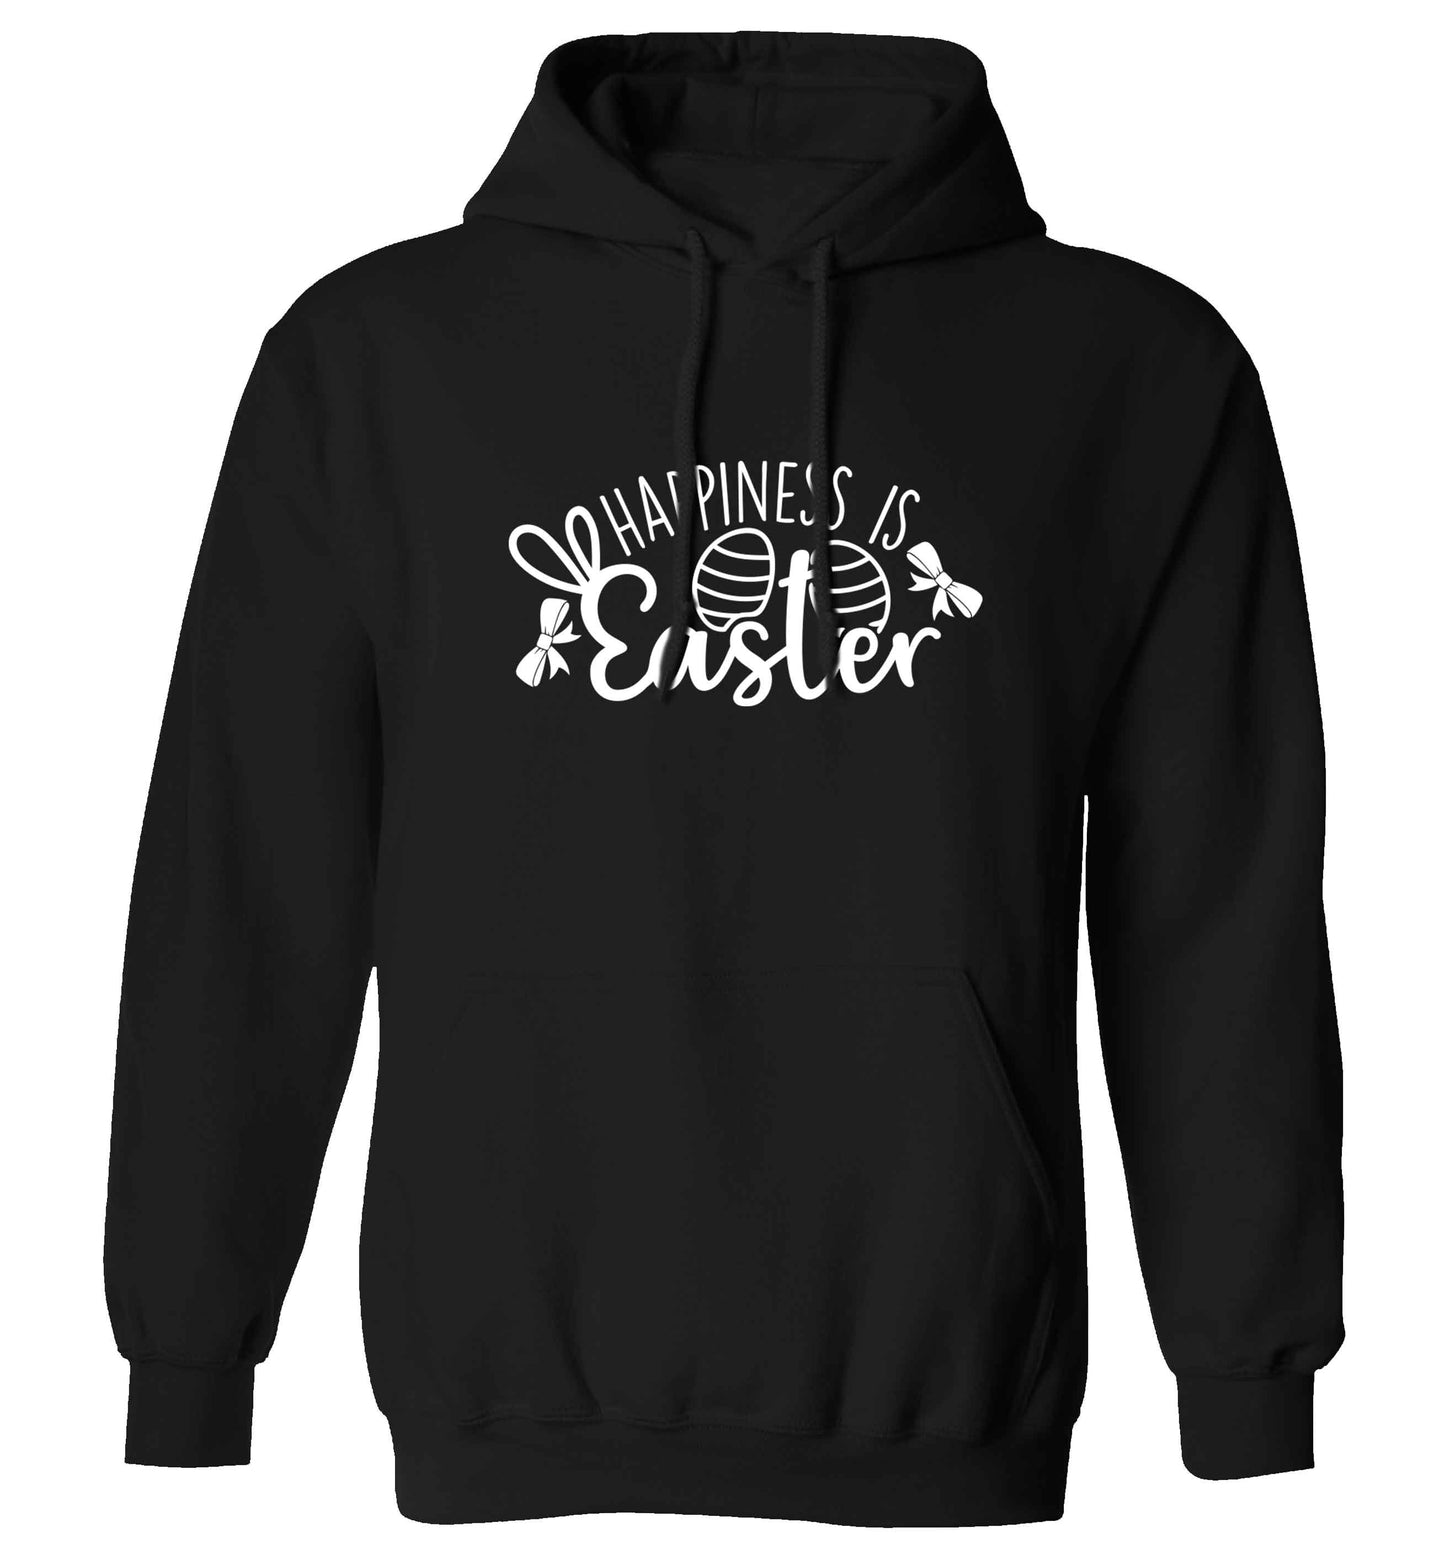 Happiness is easter adults unisex black hoodie 2XL